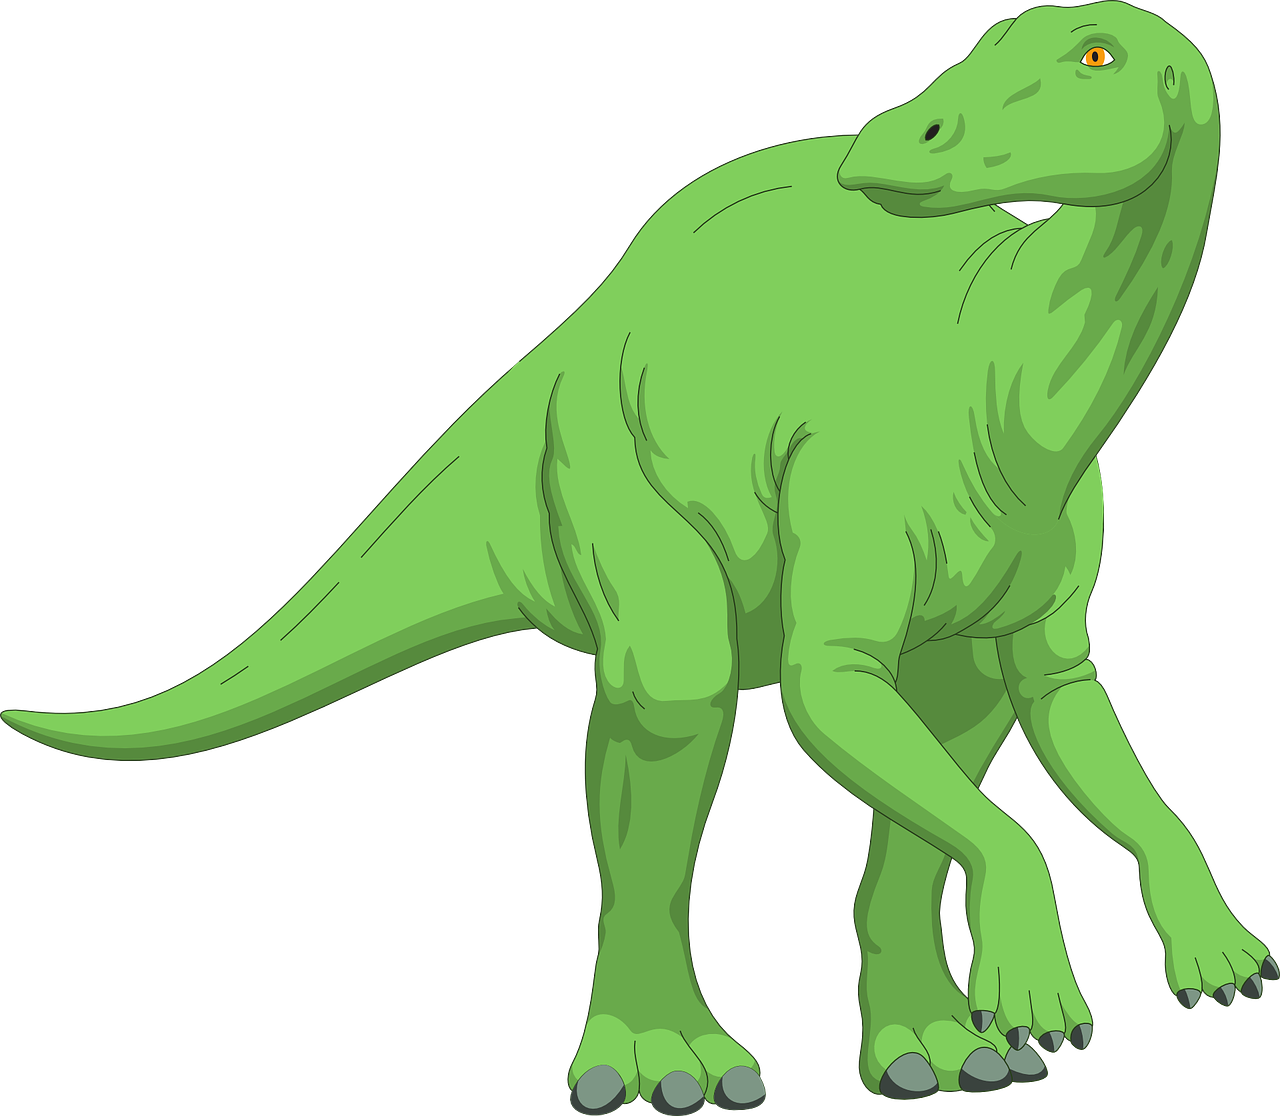 a green dinosaur standing in front of a black background, an illustration of, inspired by Adam Rex, shutterstock, wikihow illustration, high detail illustration, computer - generated, white background